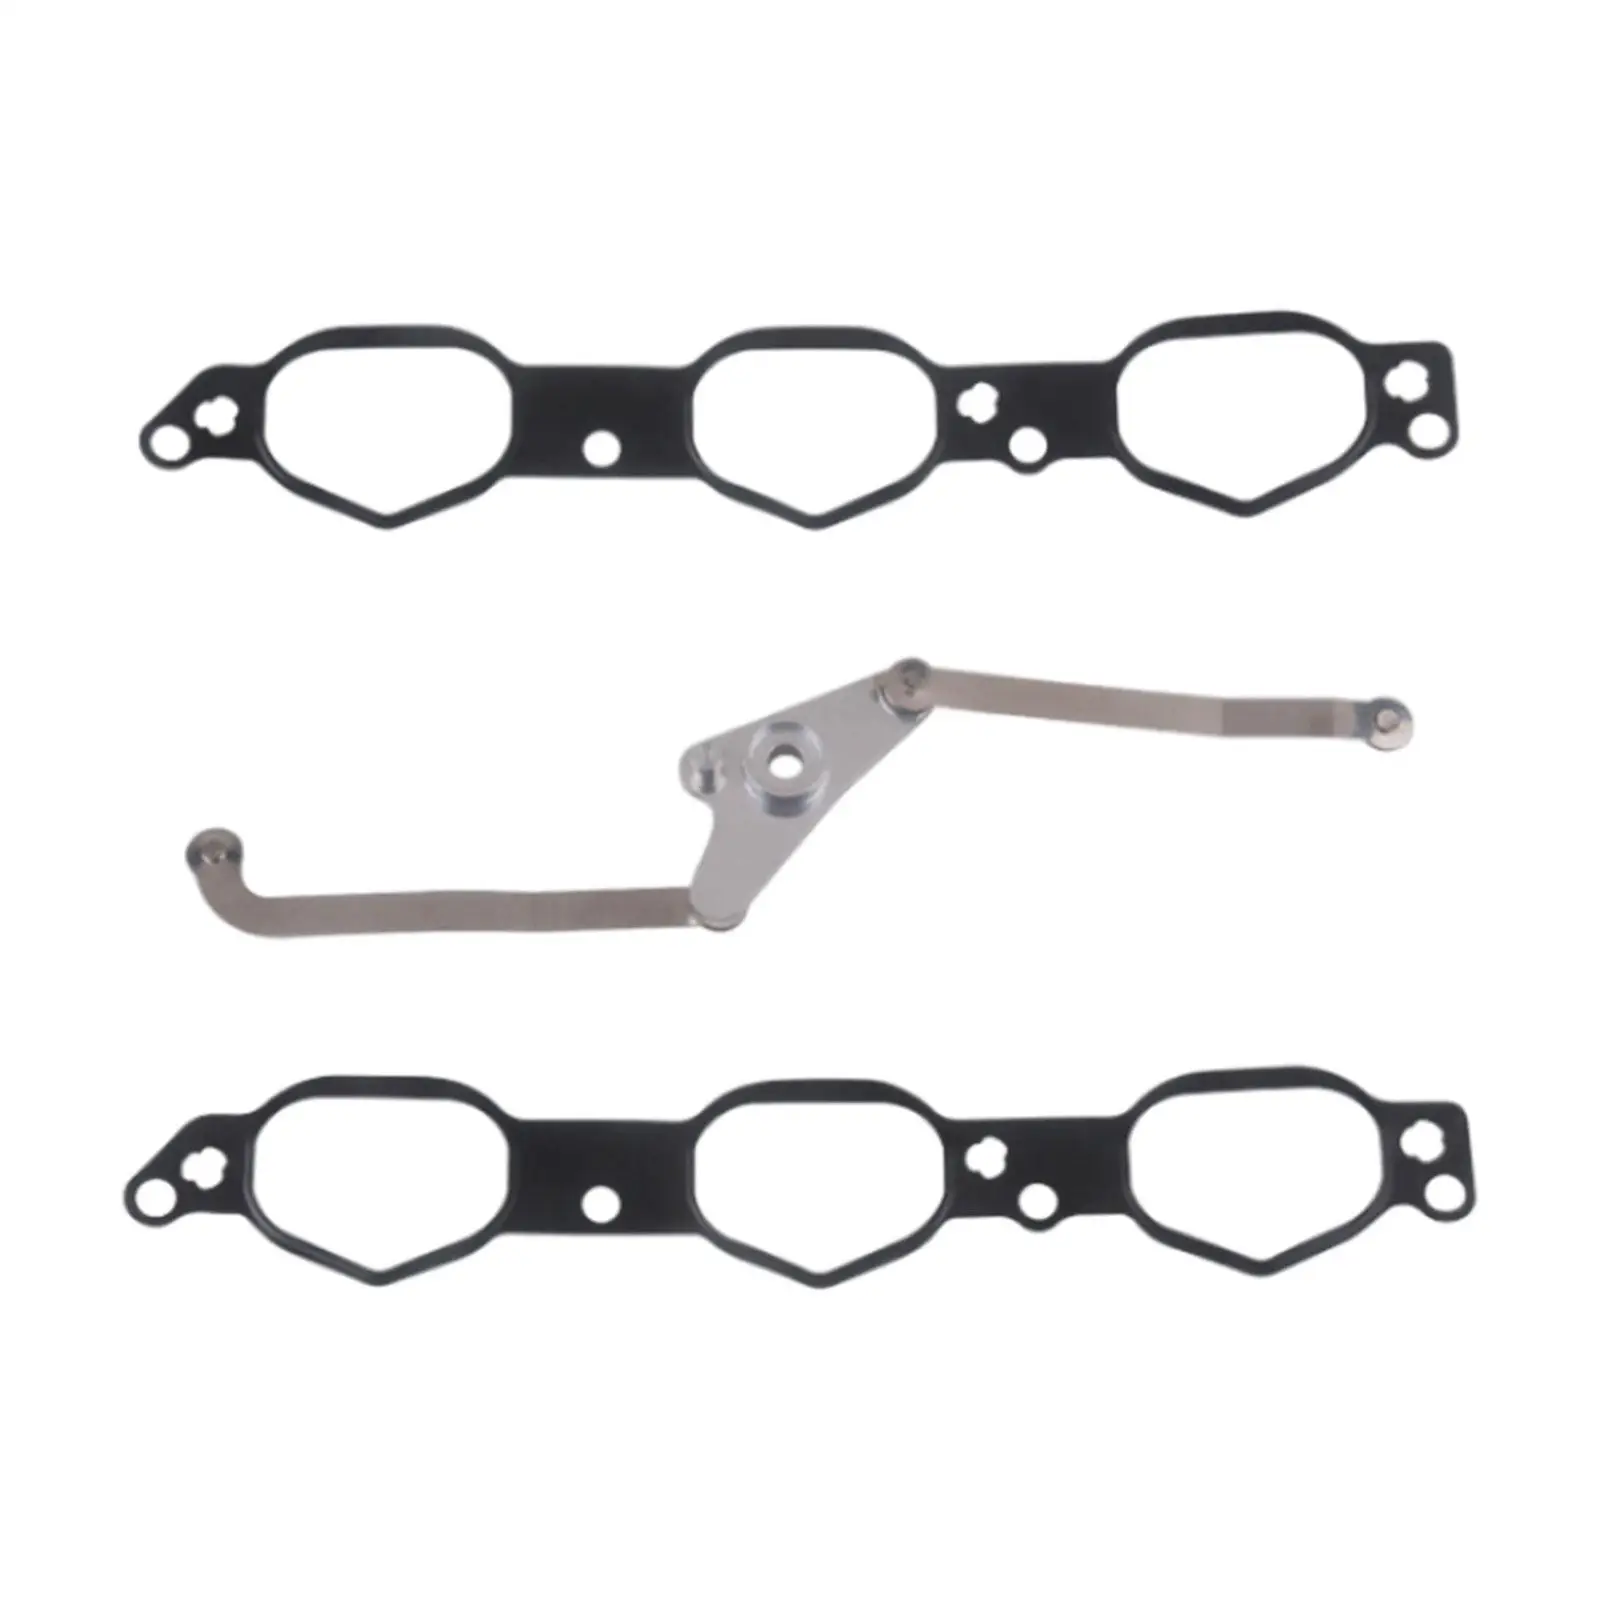 Intake Manifold Air Flap Runner Lever Repair Kit Automobile Gasket Spare Parts for Mercedes-benz SLK280 S400 E350 ml350